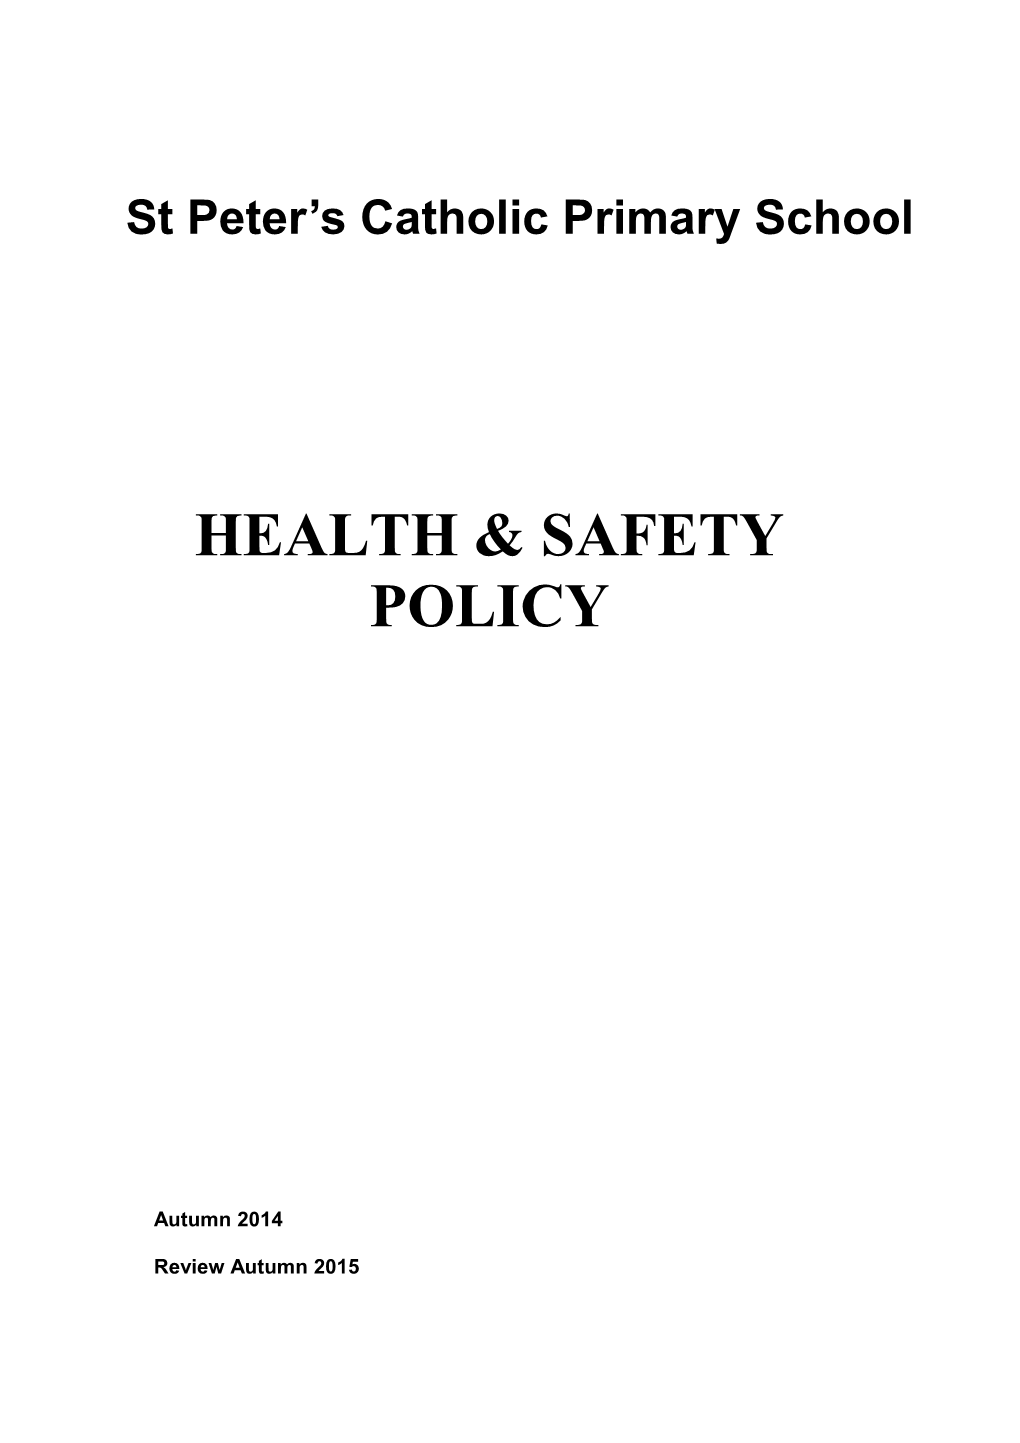 Copley High School Health and Safety Policy